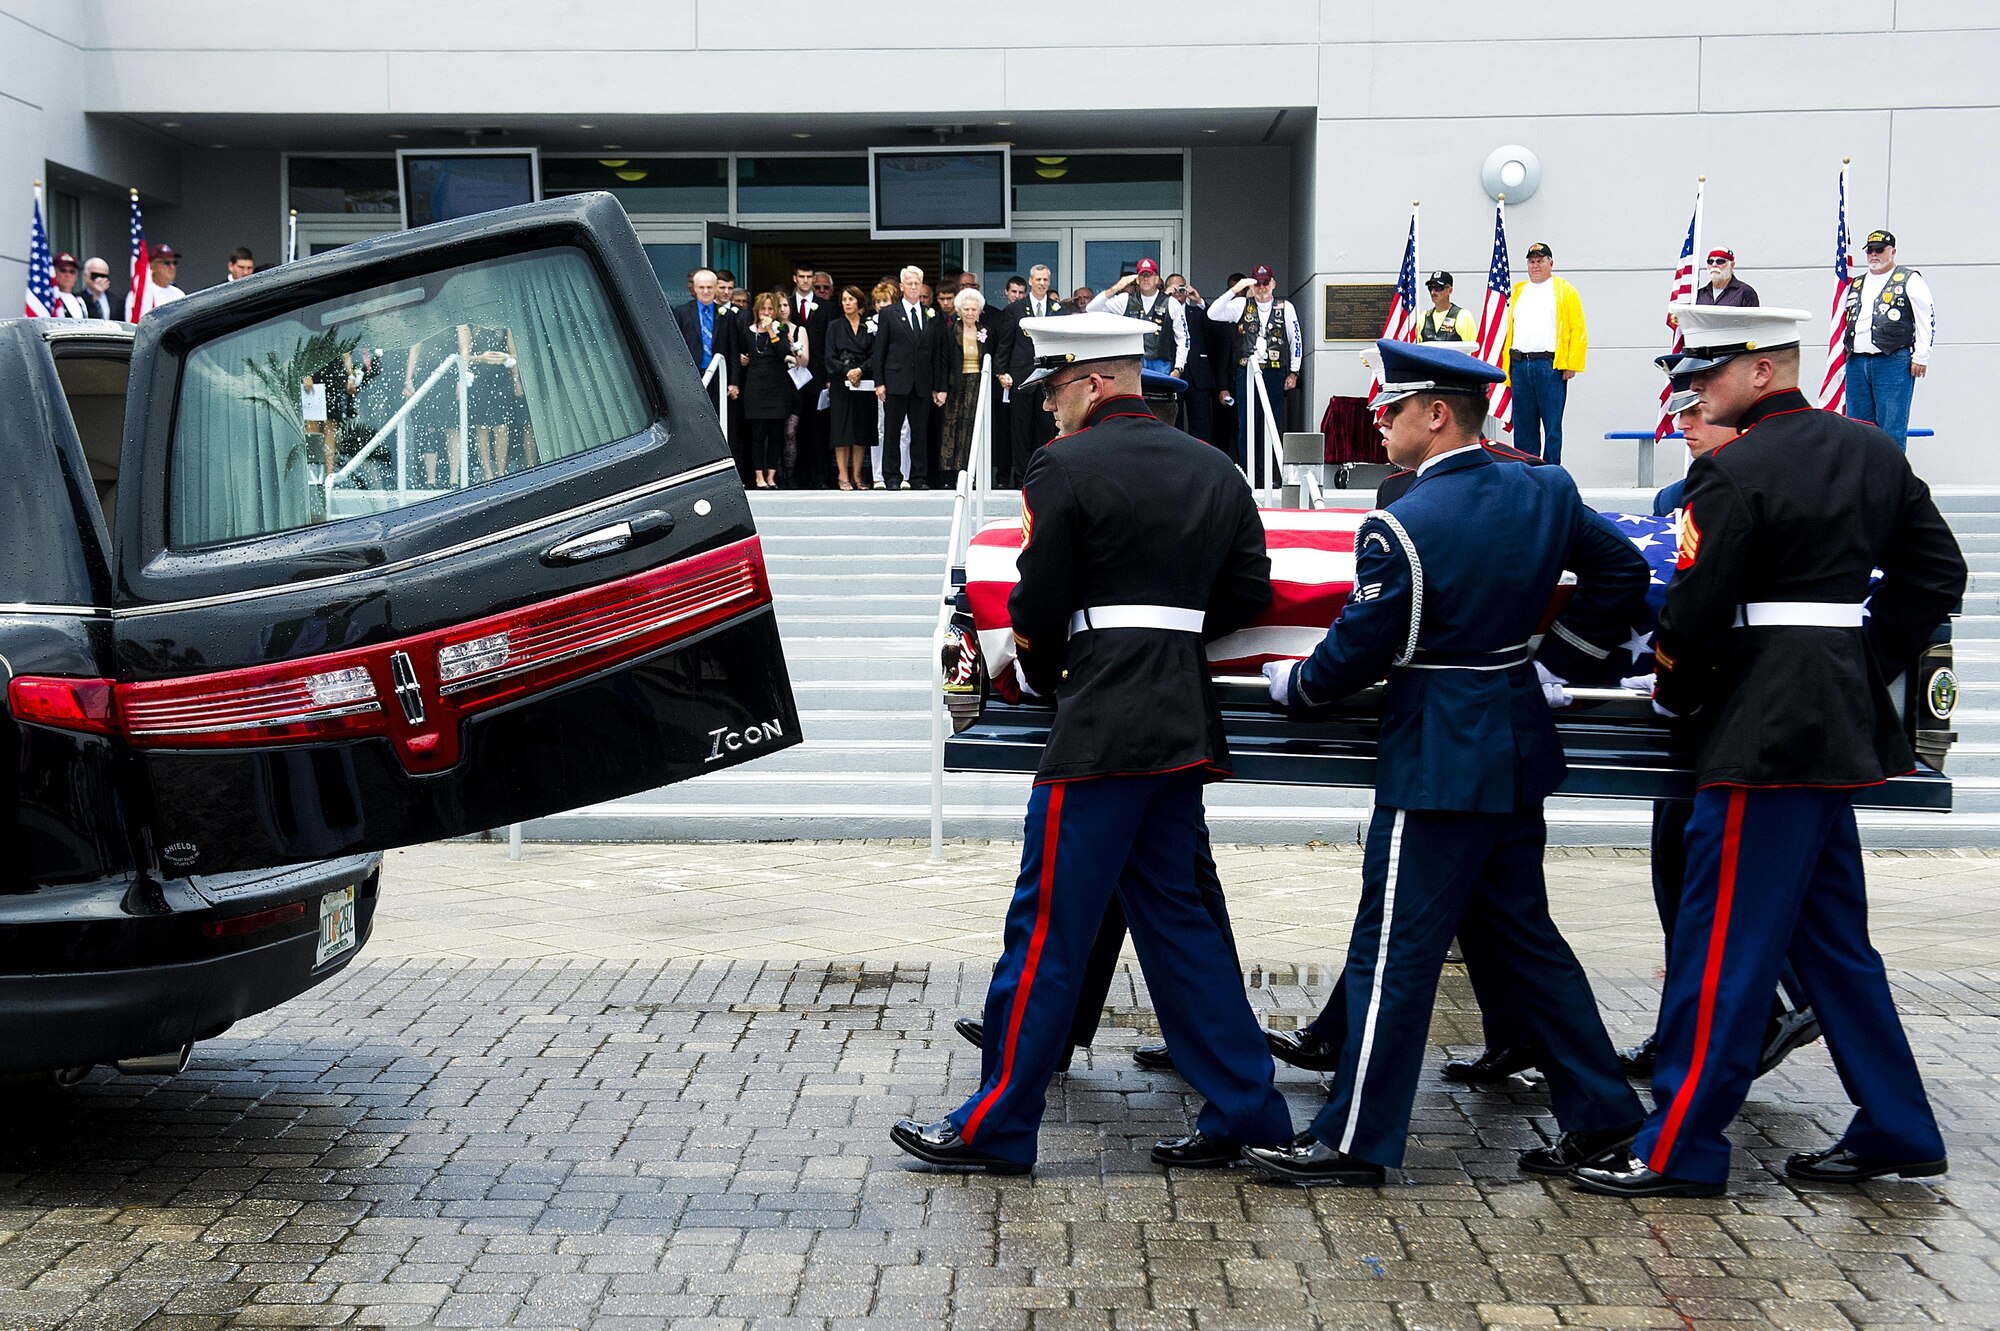 Pallbearers, consisting of Airmen and Marines carry retired U.S. Air Force Col. George “Bud” Day’s casket out during a memorial service for Day at the Emerald Coast Convention Center on Okaloosa Island, Fla., Aug. 1, 2013. Day, a Medal of Honor recipient and combat pilot with service in World War II, Korea and Vietnam, passed away July 28 at the age of 88. (U.S. Air Force Photo / Airman 1st Class Christopher Callaway)